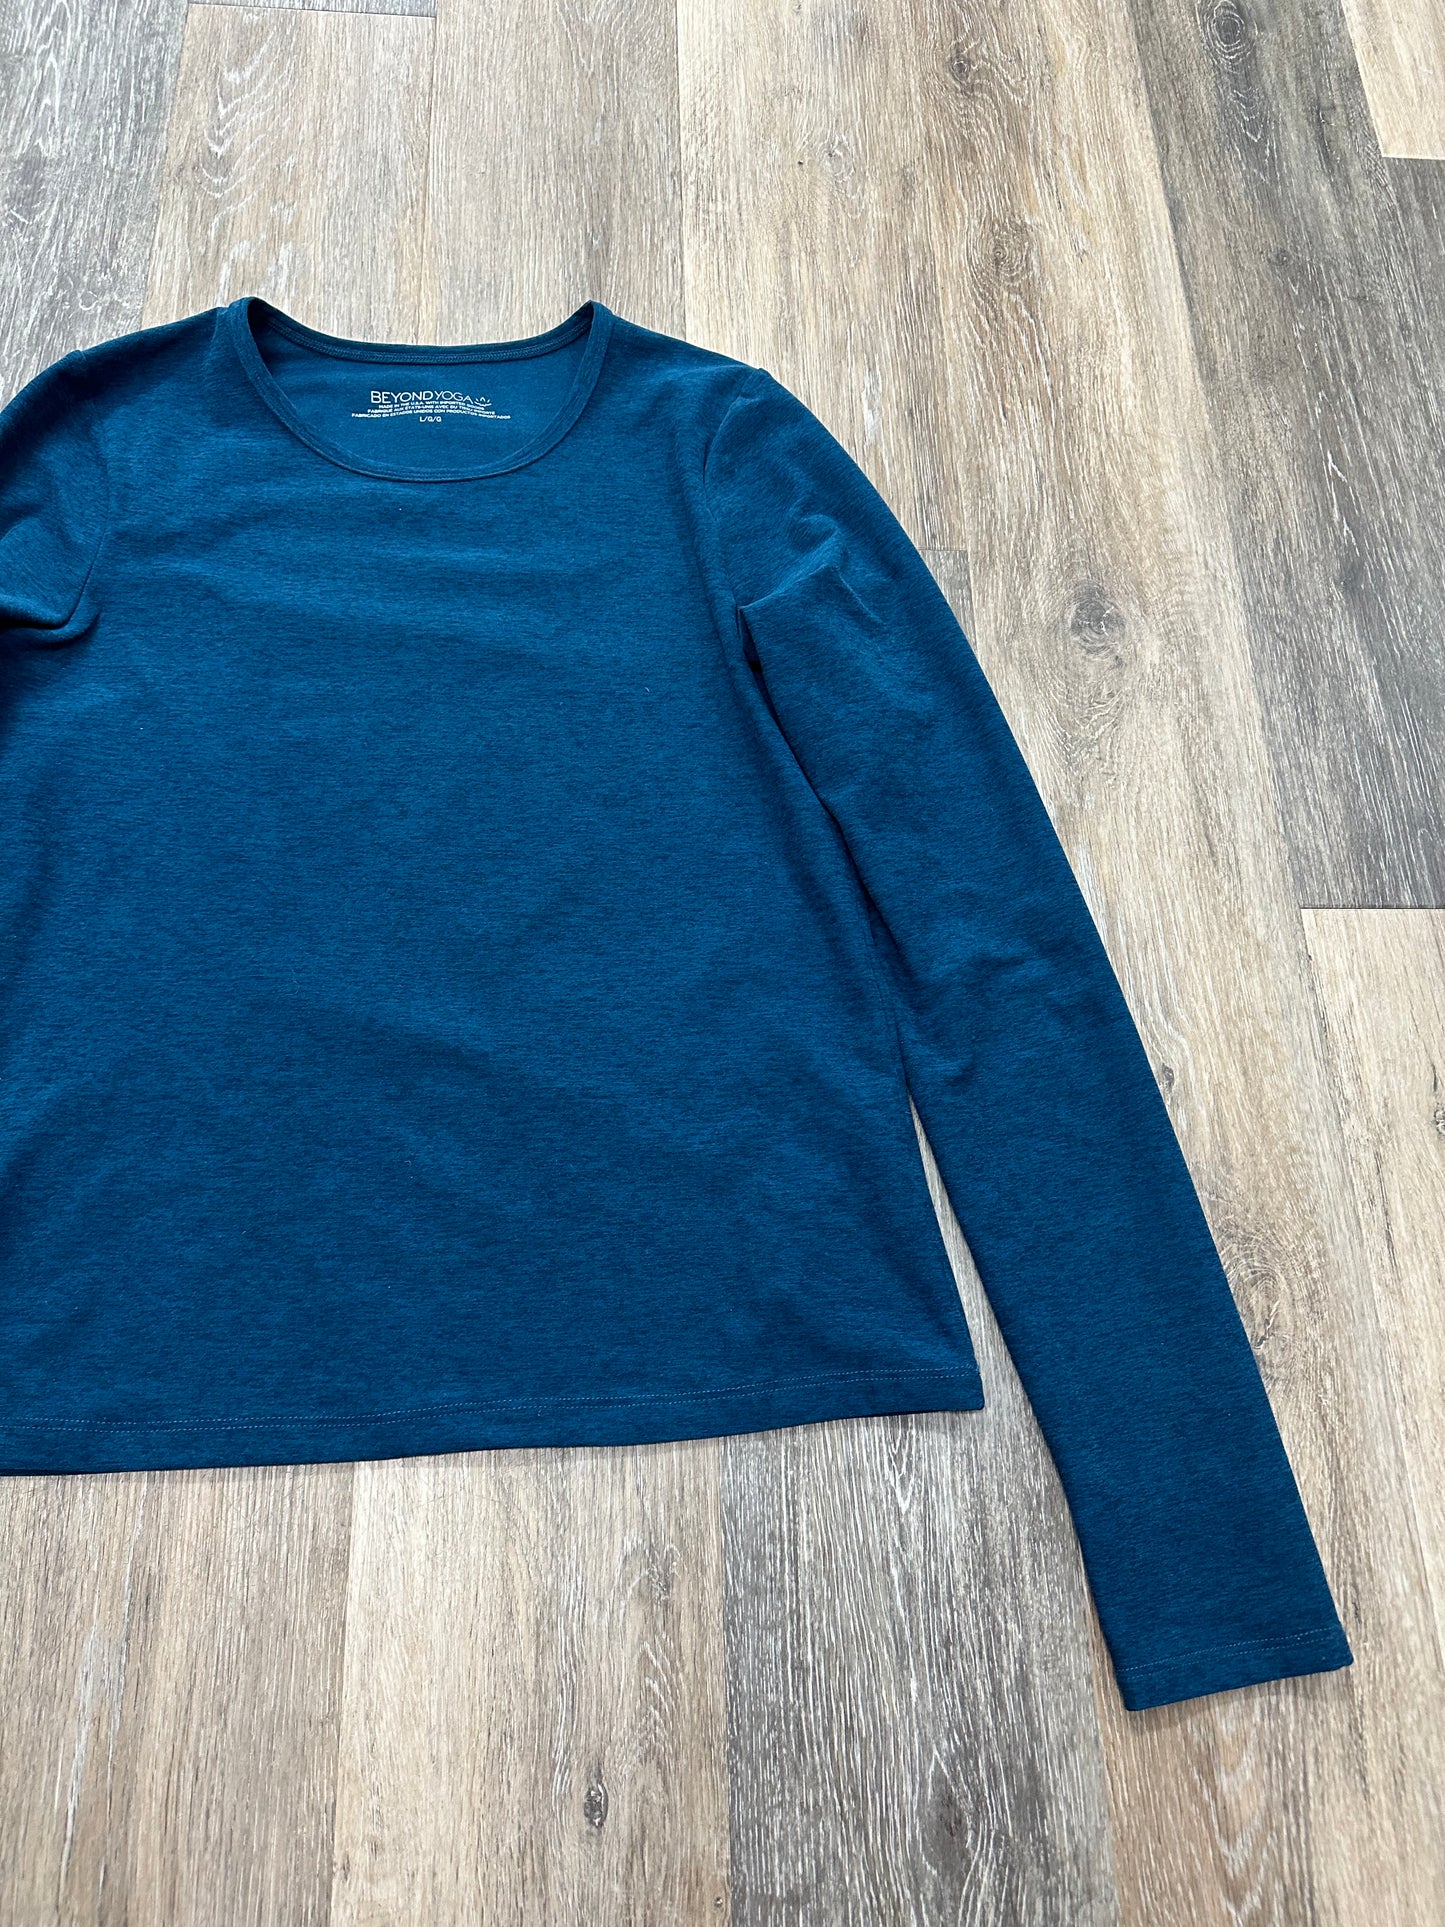 Athletic Top Long Sleeve Crewneck By Beyond Yoga  Size: L